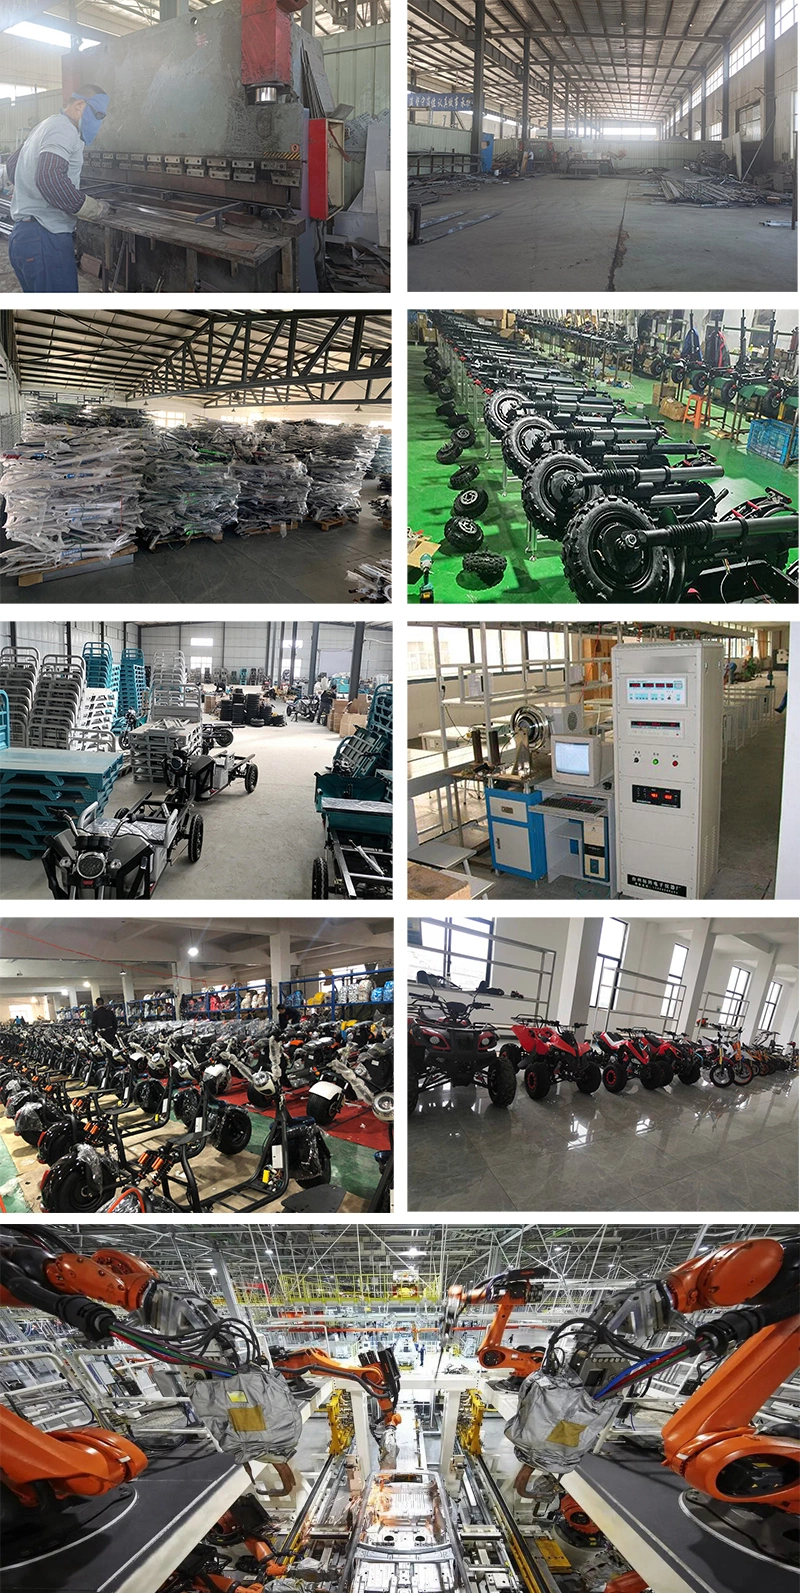 Electrical for Motor Electr Bike Electrically Canvas Hood High Scooter Adult Wheel Cheap Tricycles UV Taxi 3 Electric Tricycle